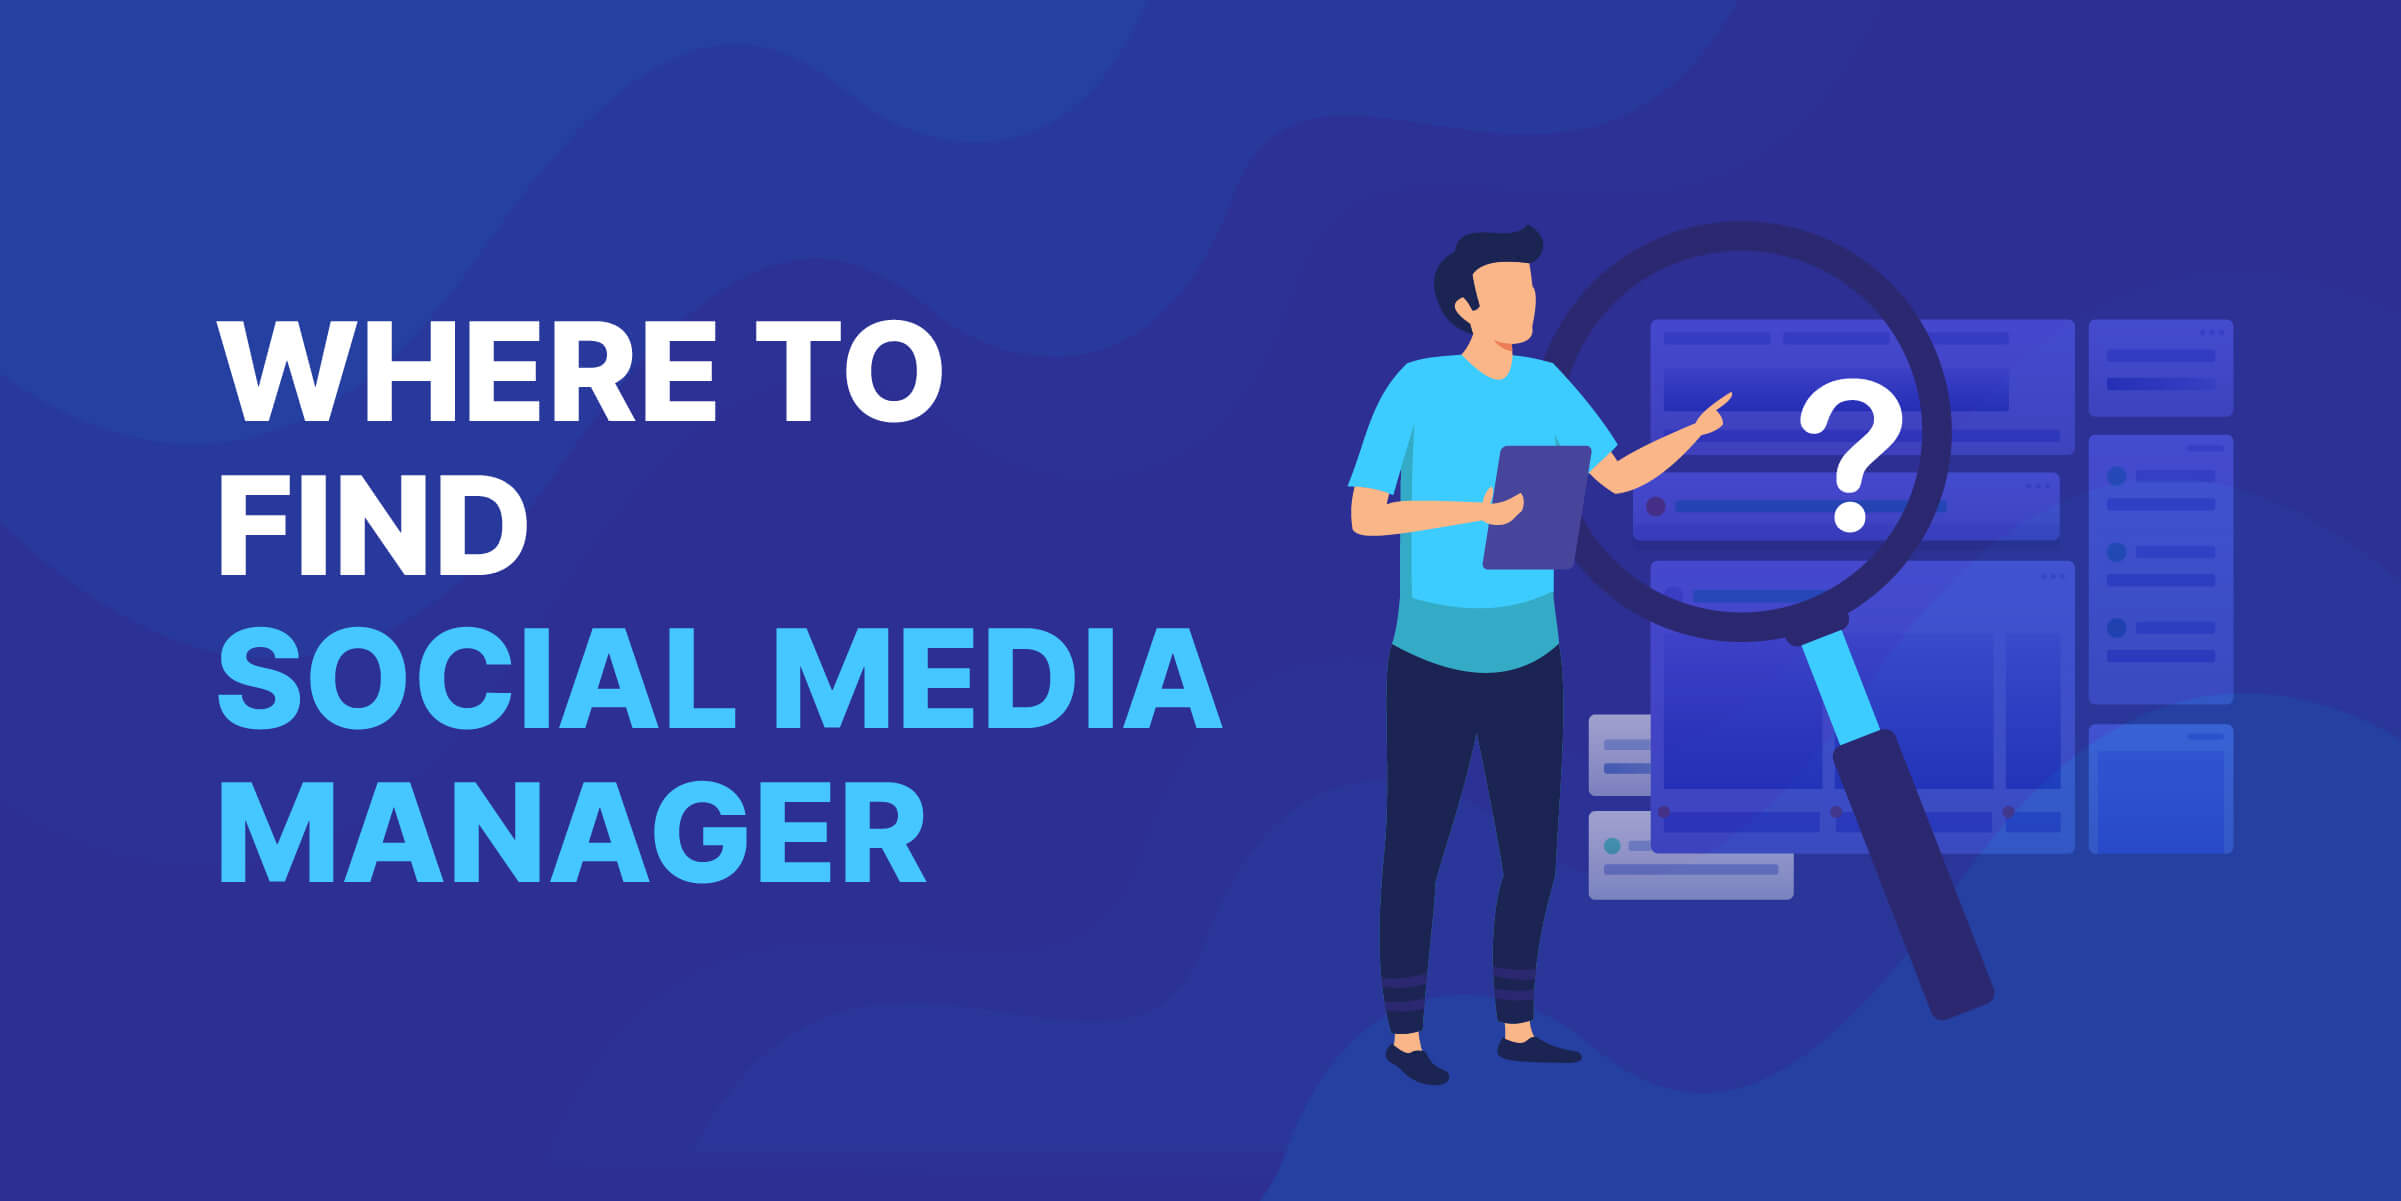 Where to FInd Social Media Manager